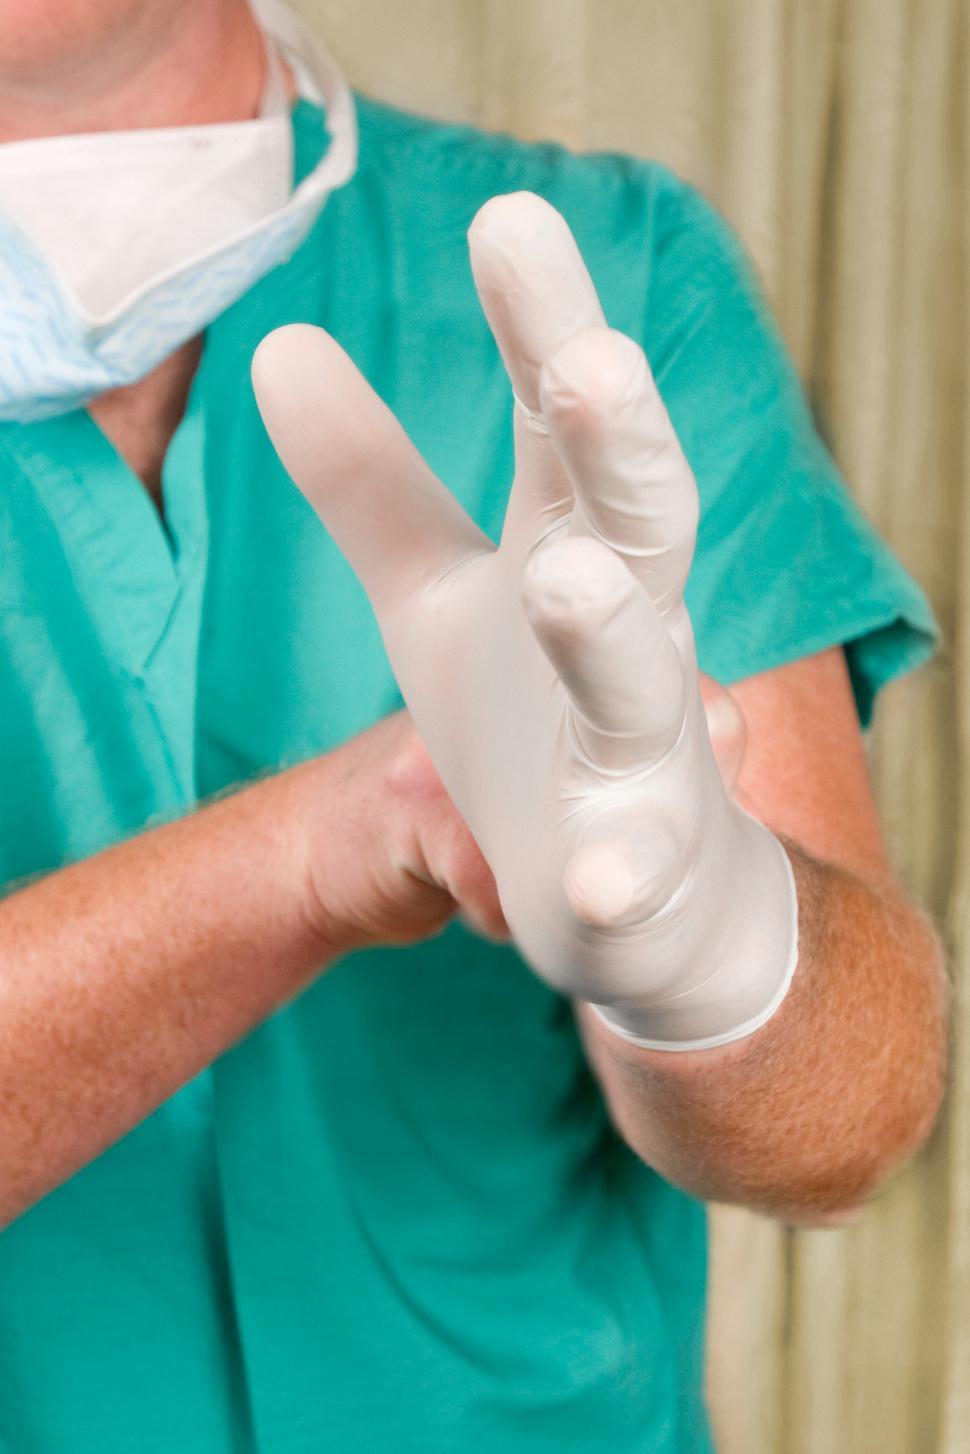 Free Image of Medical Provider Putting on Gloves 